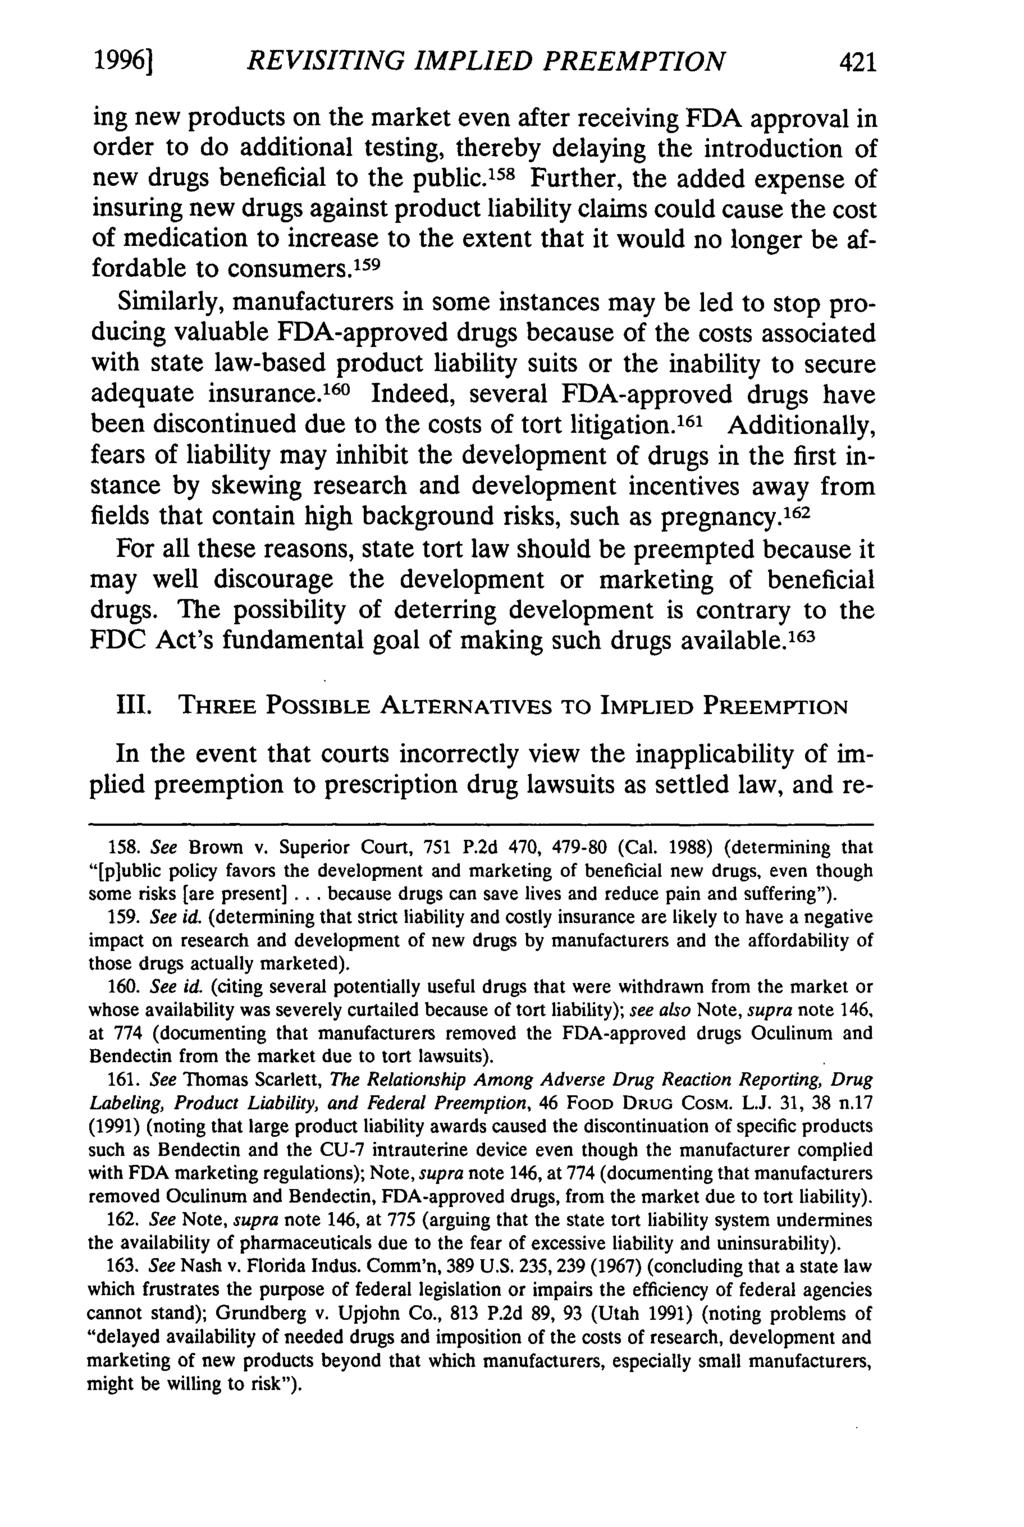 1996] REVISITING IMPLIED PREEMPTION 421 ing new products on the market even after receiving FDA approval in order to do additional testing, thereby delaying the introduction of new drugs beneficial